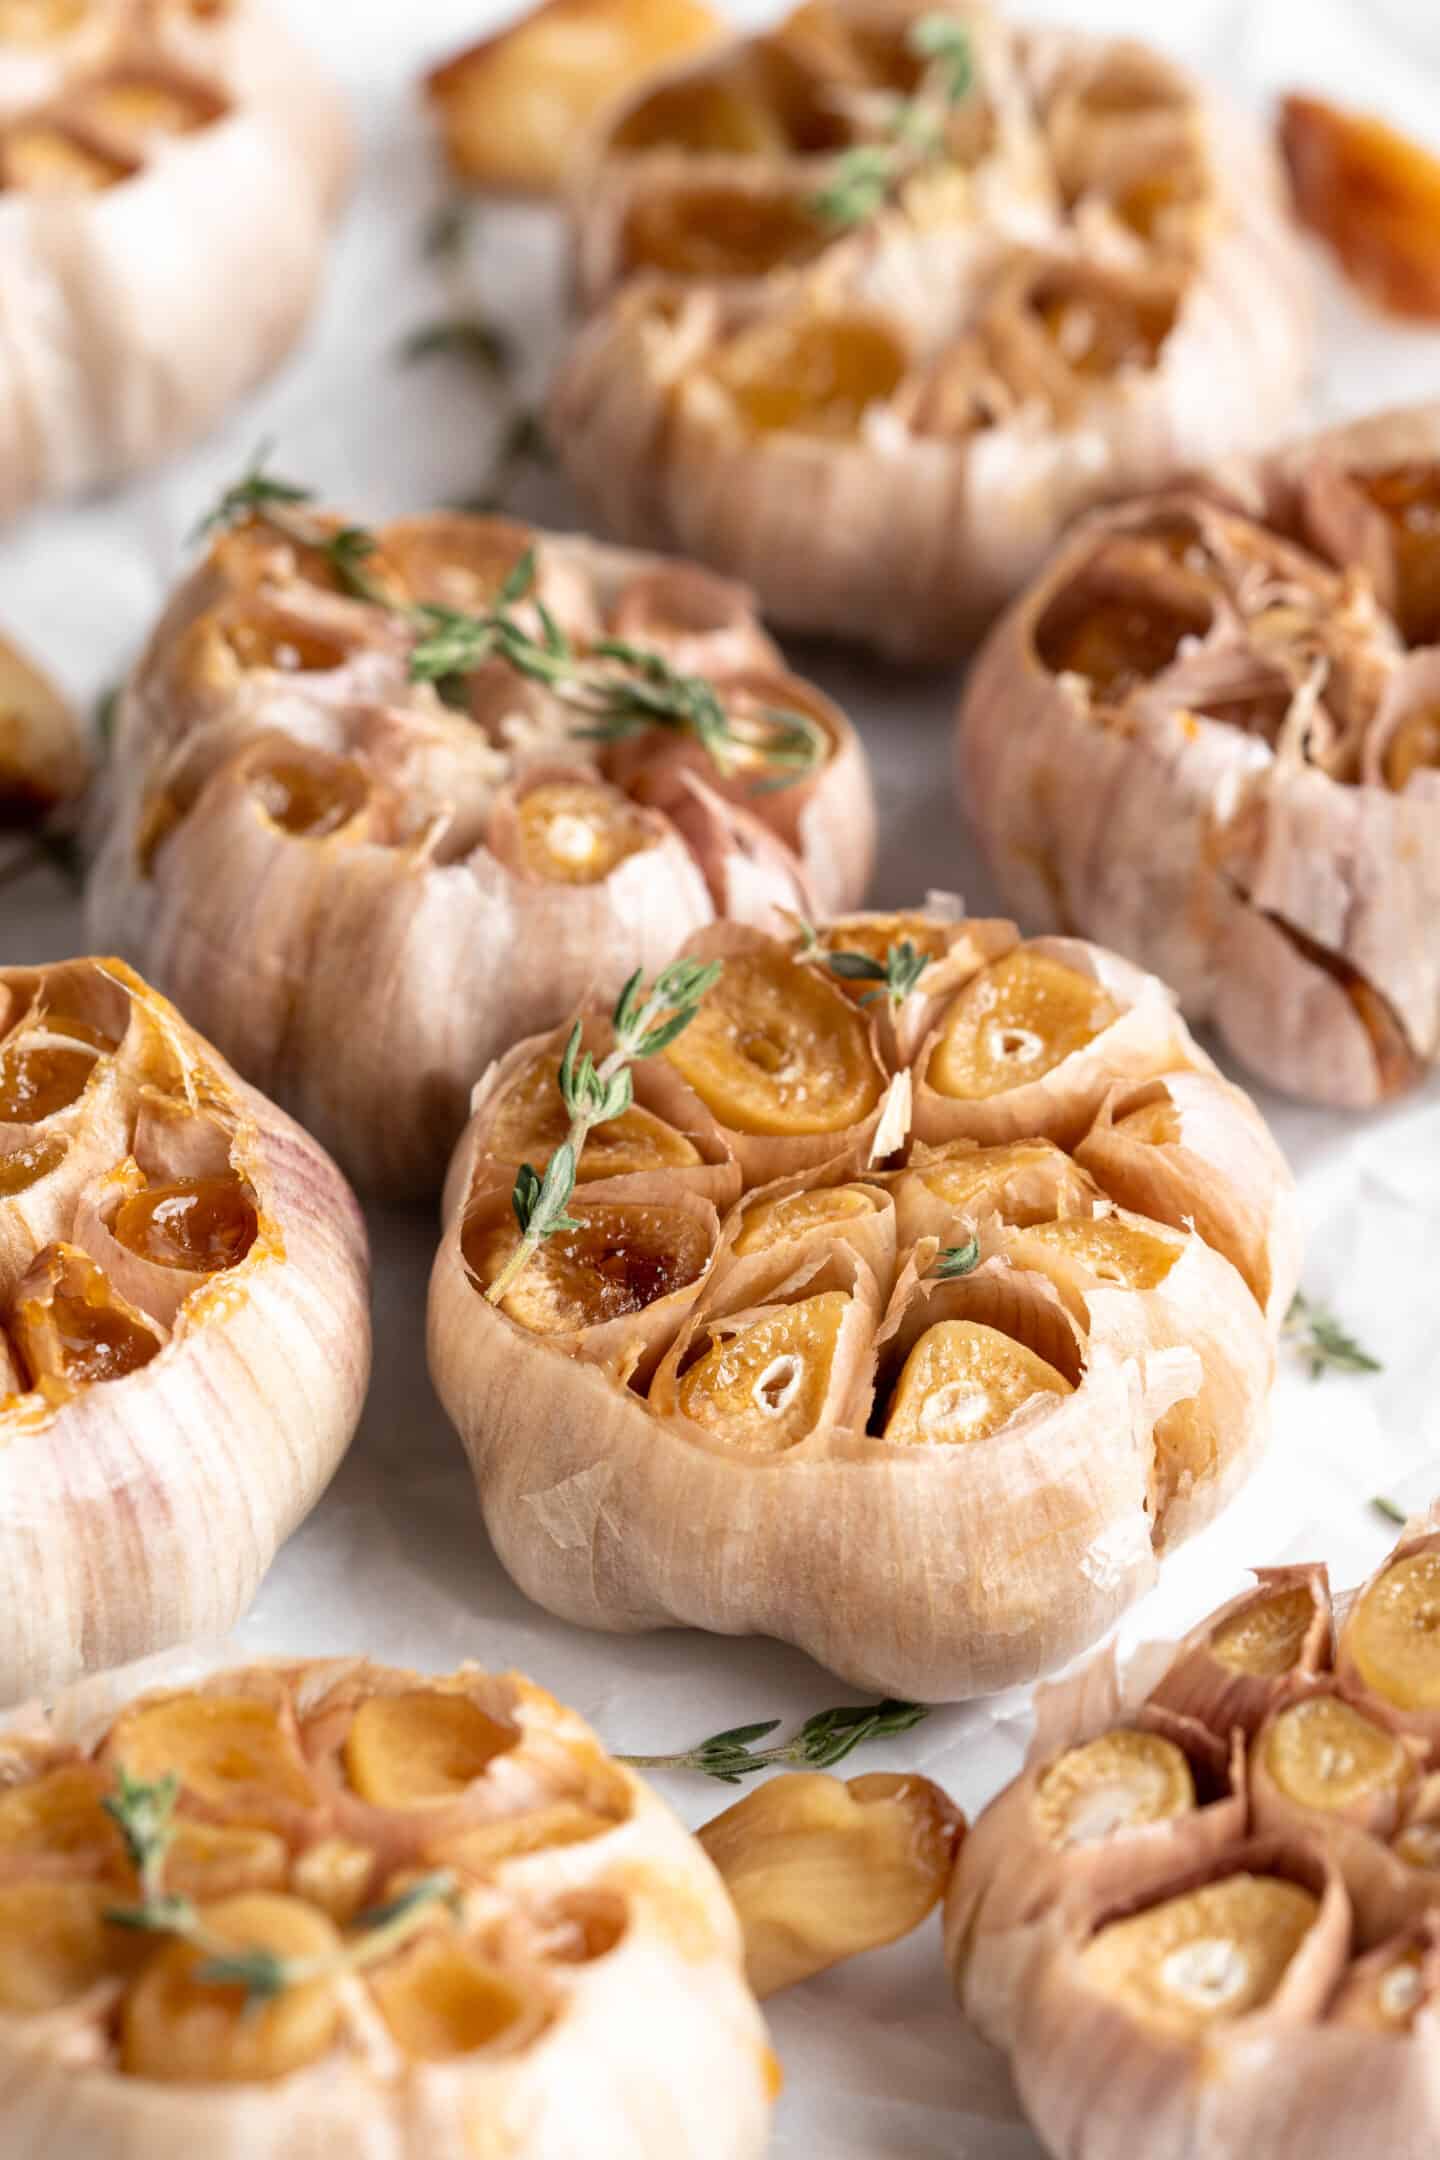 Roasted garlic heads with sprigs of thyme